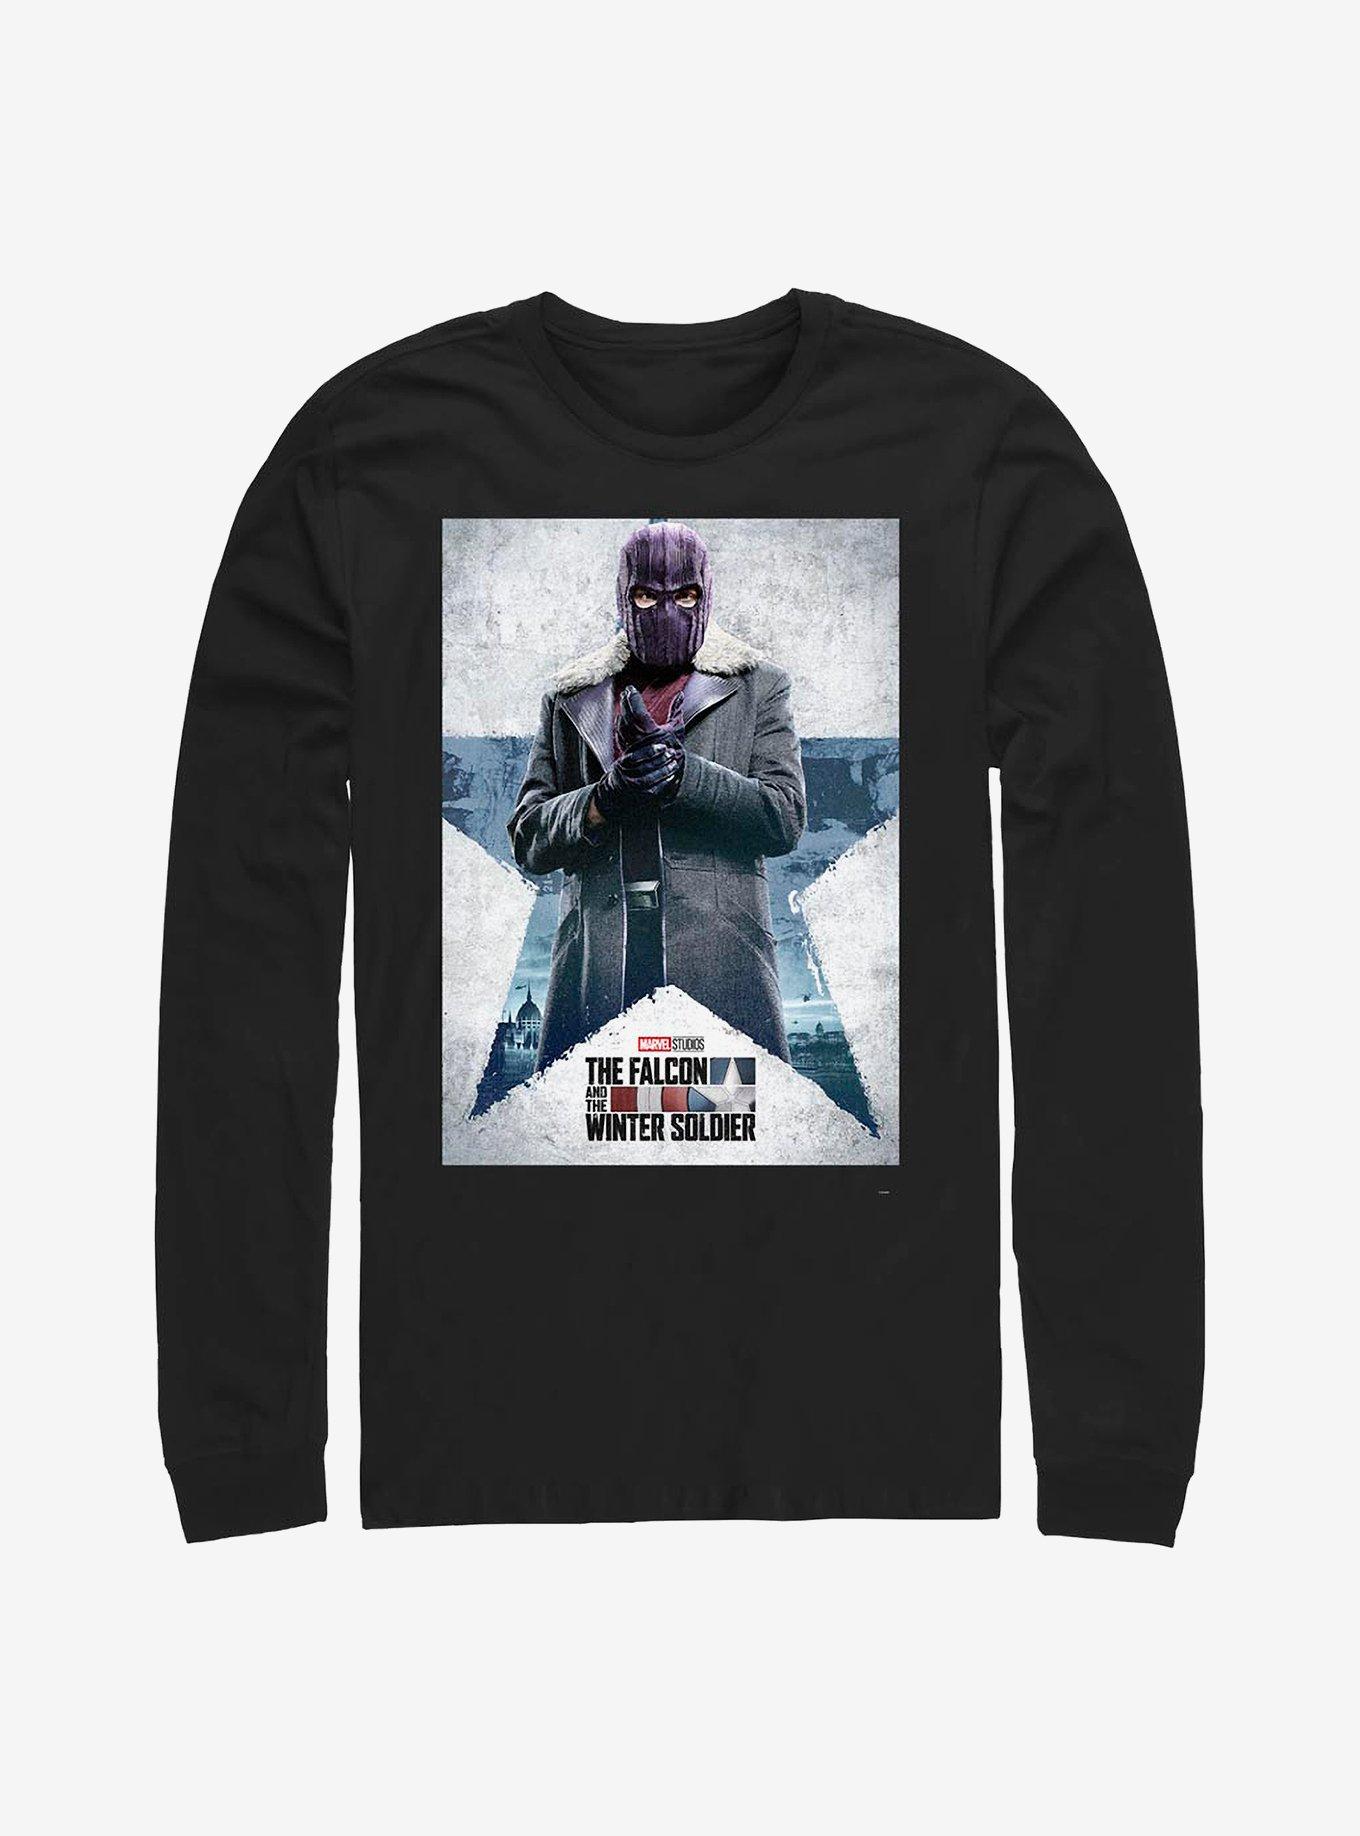 Marvel The Falcon And The Winter Soldier Zemo Poster Long-Sleeve T-Shirt, BLACK, hi-res